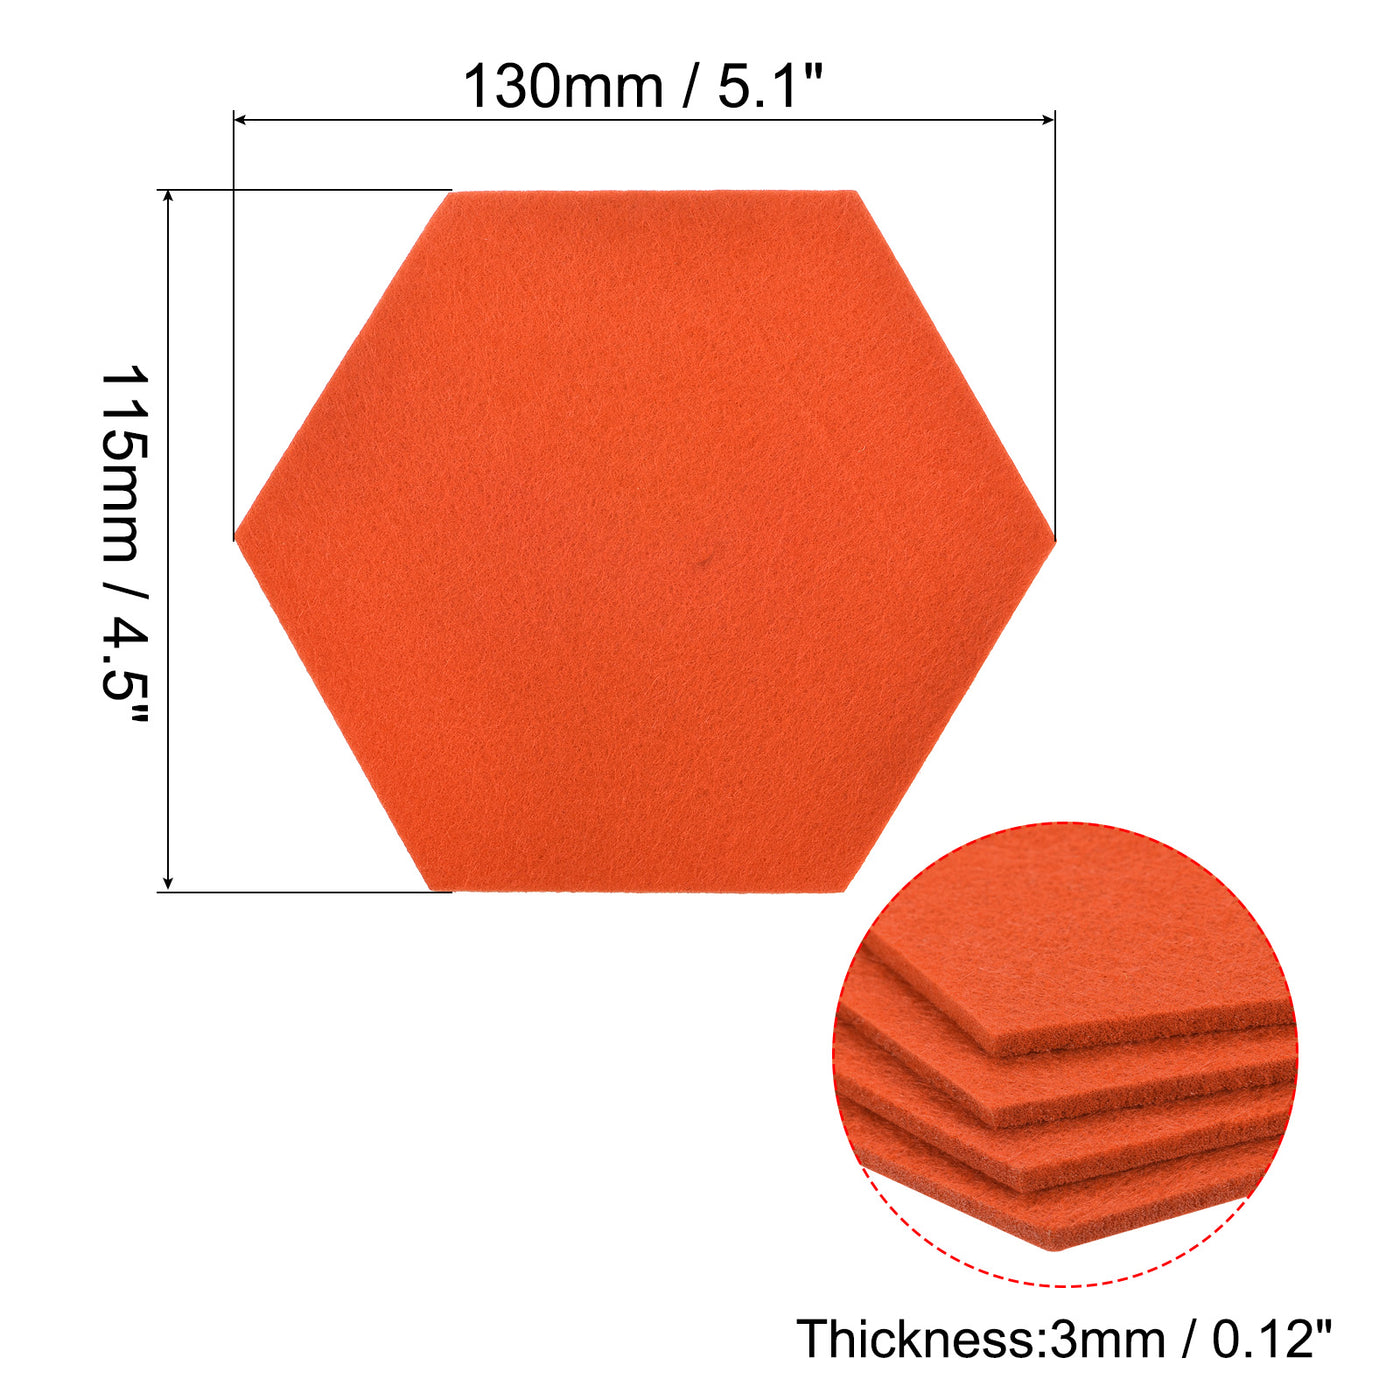 uxcell Uxcell Felt Coasters 9pcs Absorbent Pad Coaster for Drink Cup Pot Bowl Vase Orange